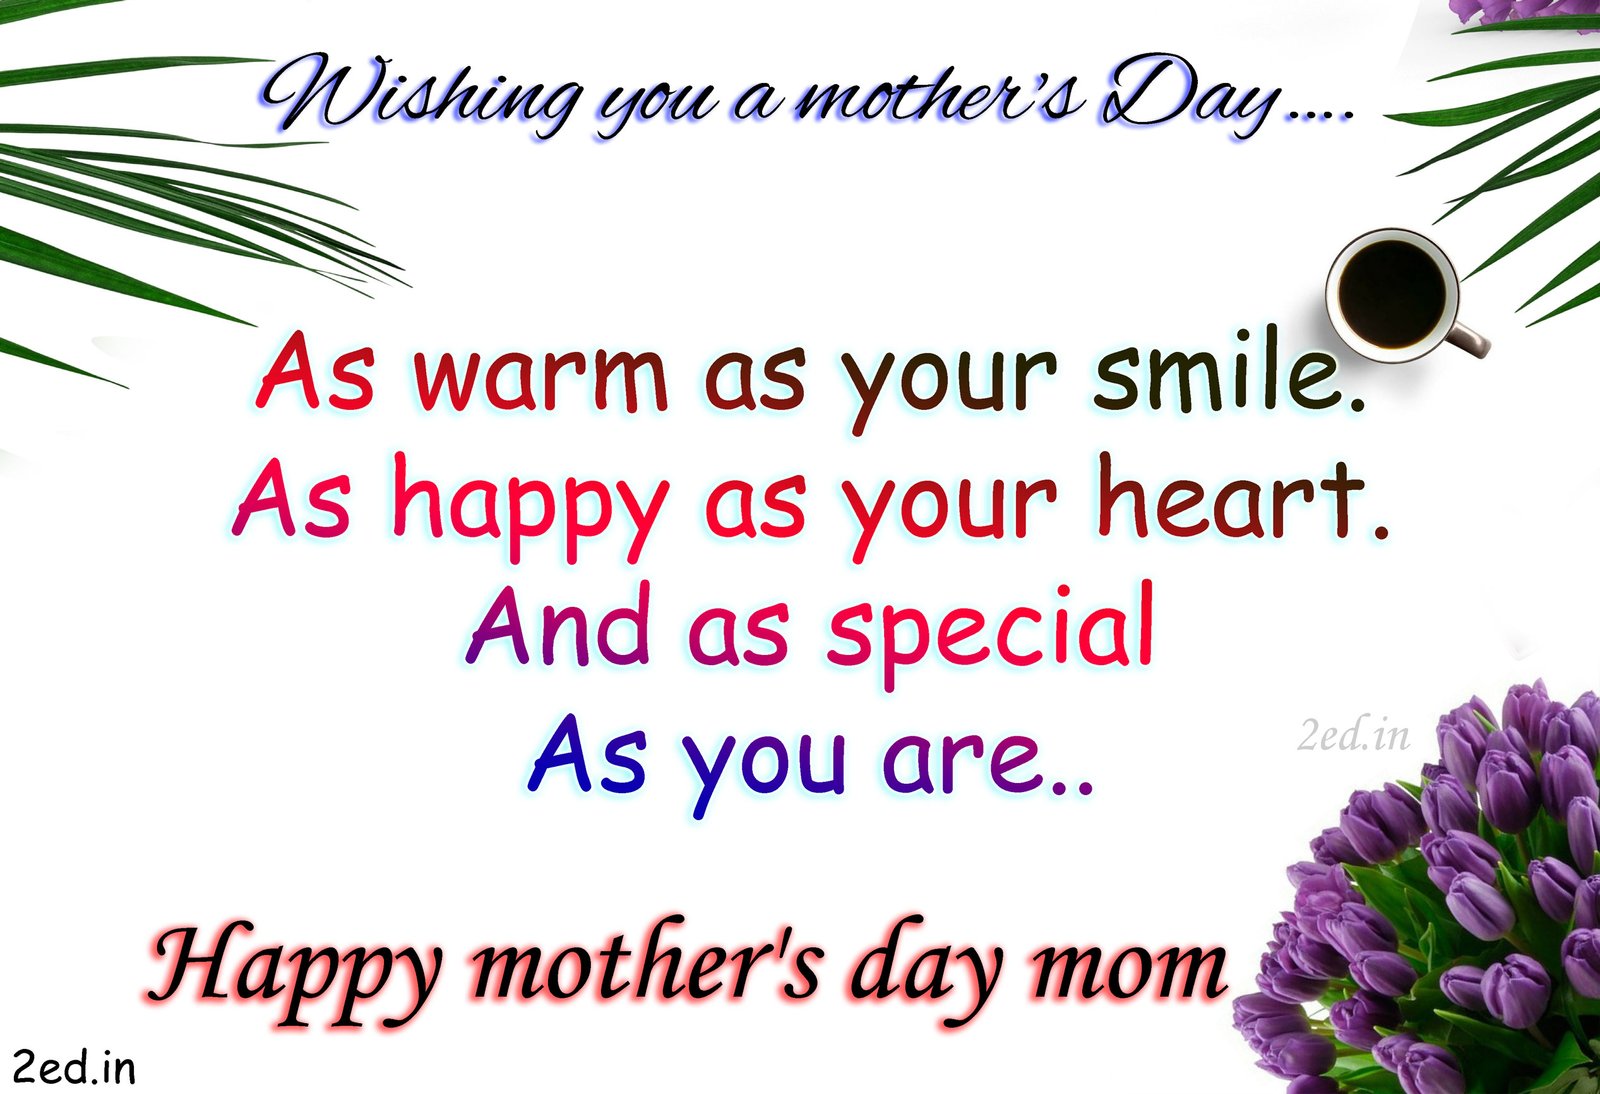 mothers day images 2020